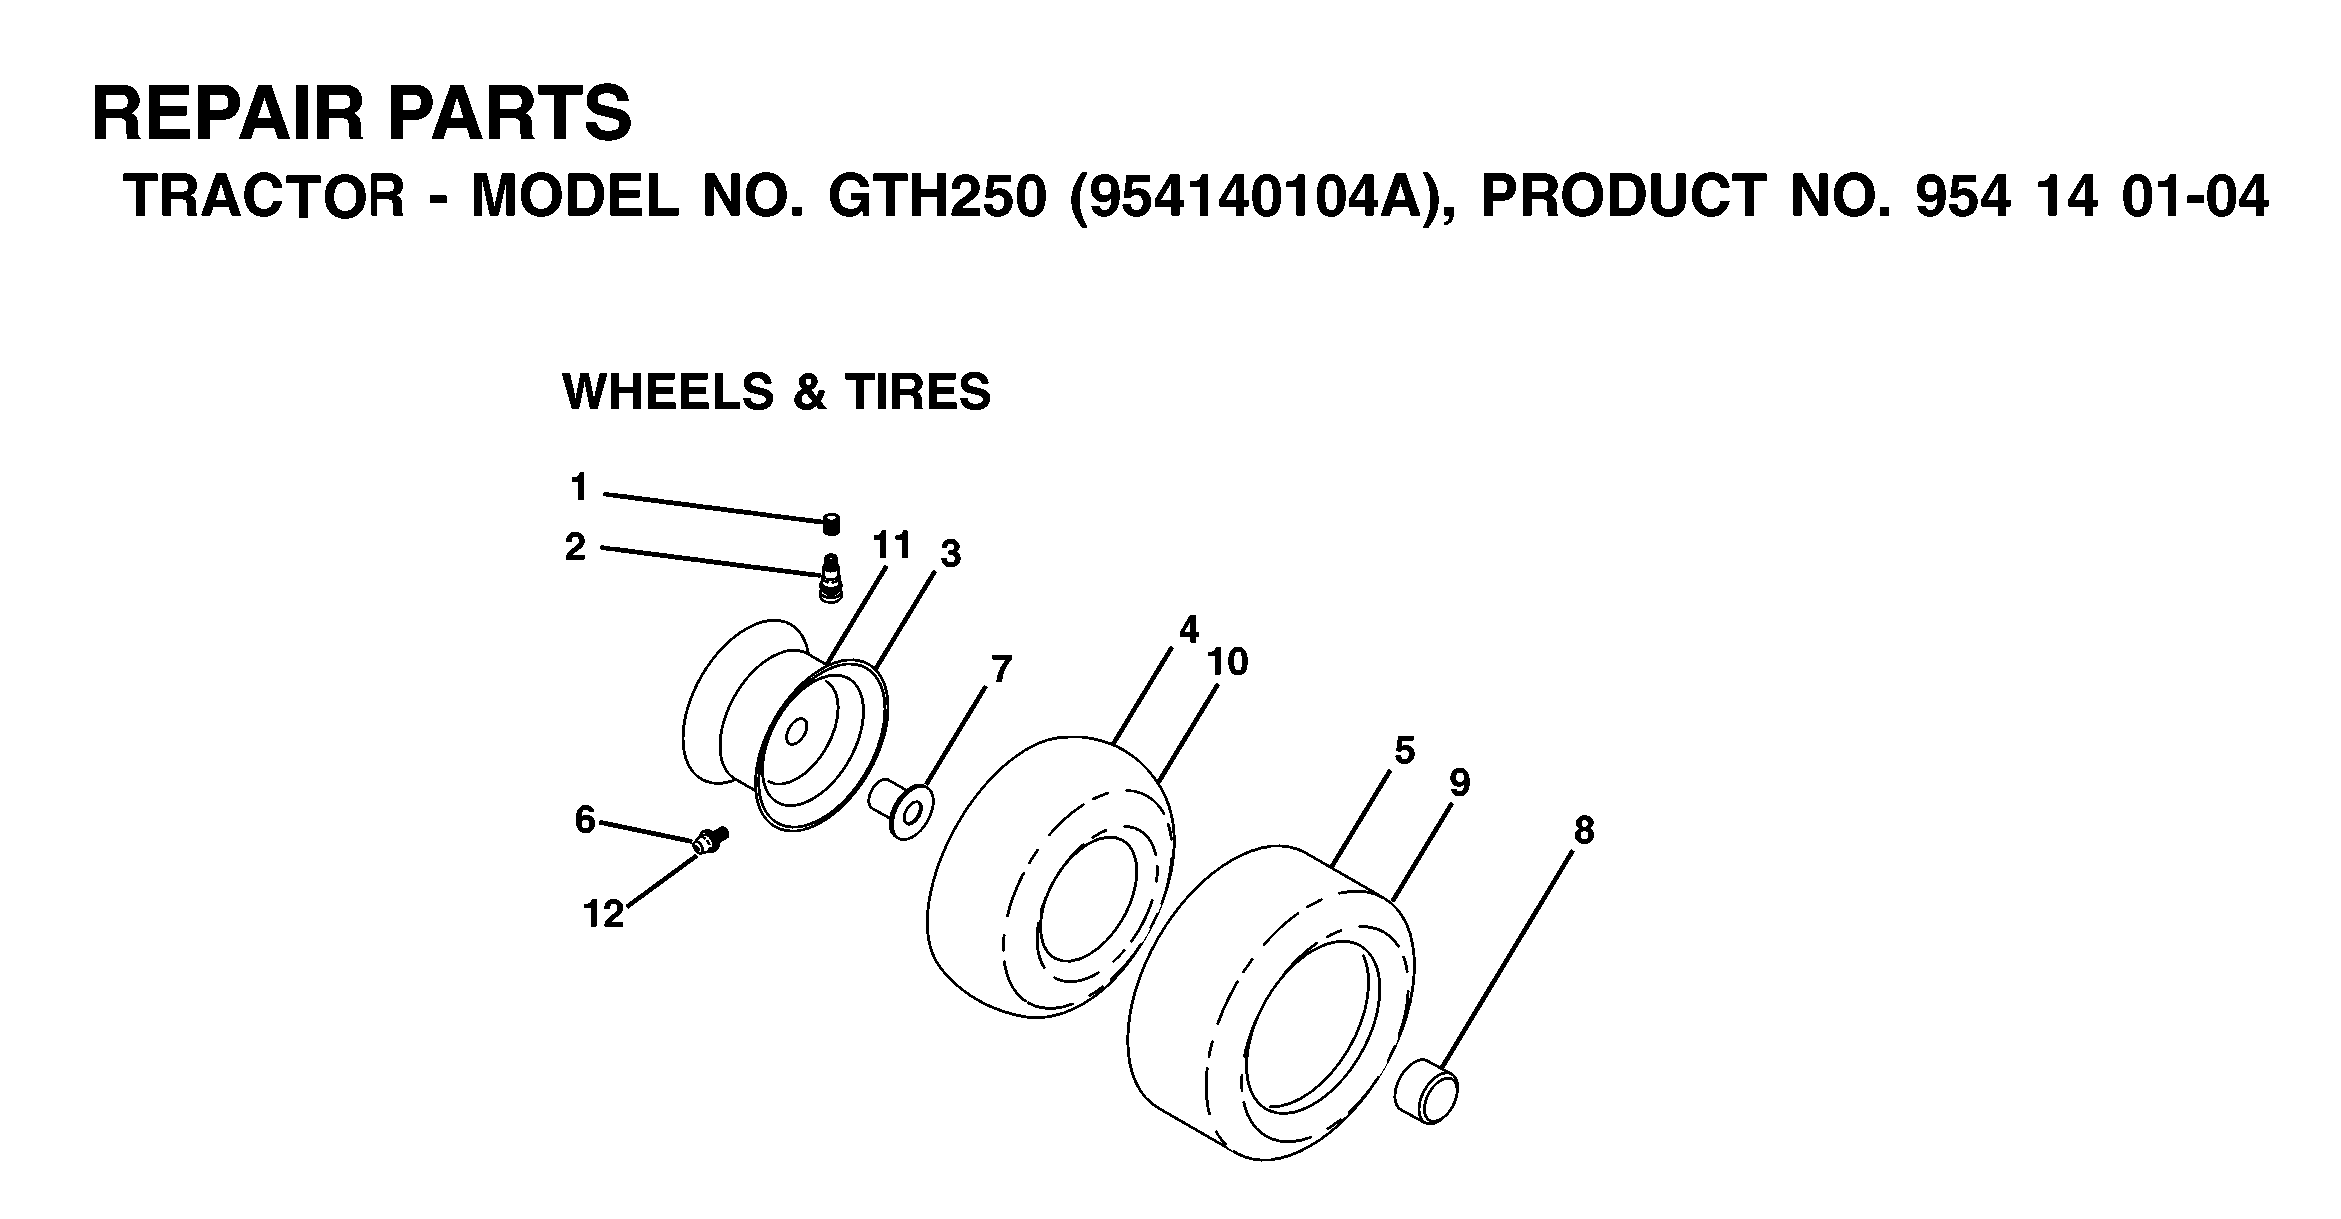 Wheels and tires 532059192, 532065139, 532148736, 532008134, 532106230, 532000278, 532009040, 532104757, 532105588, 532007154, 532106277, 532124860, 576707201